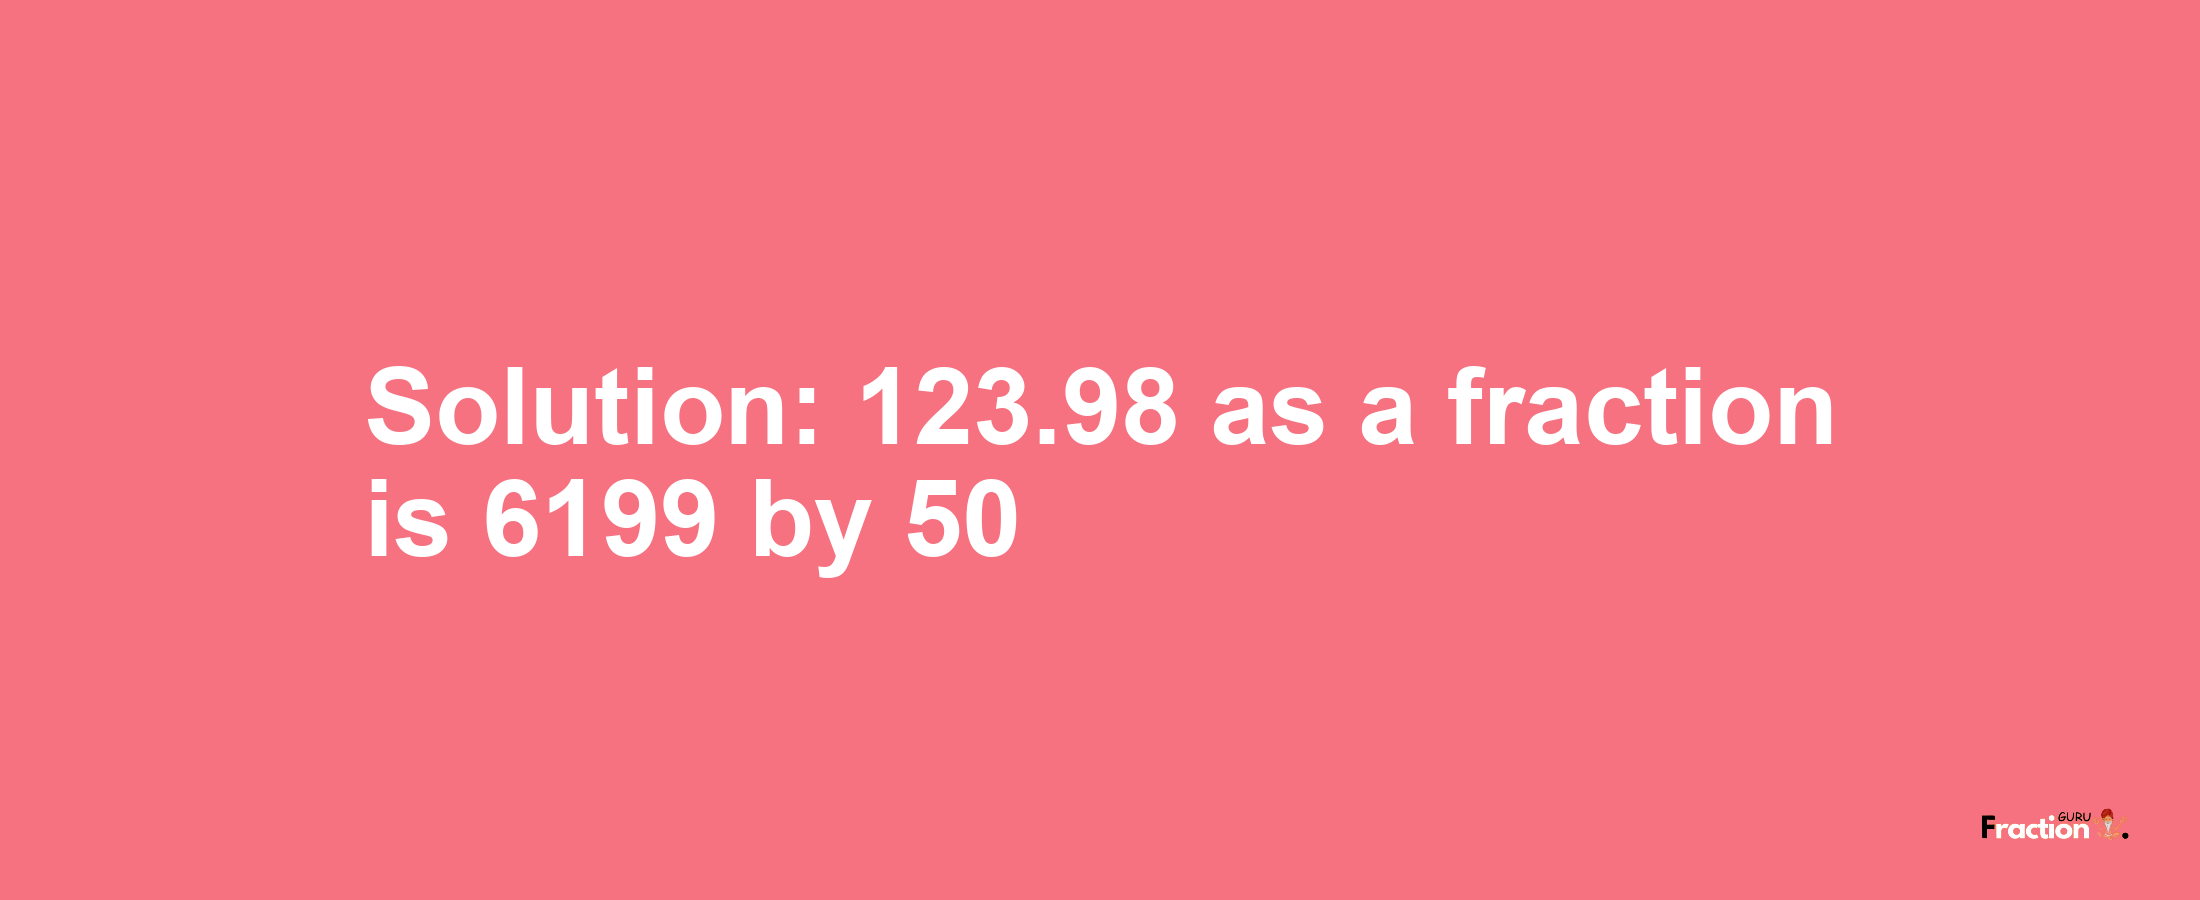 Solution:123.98 as a fraction is 6199/50